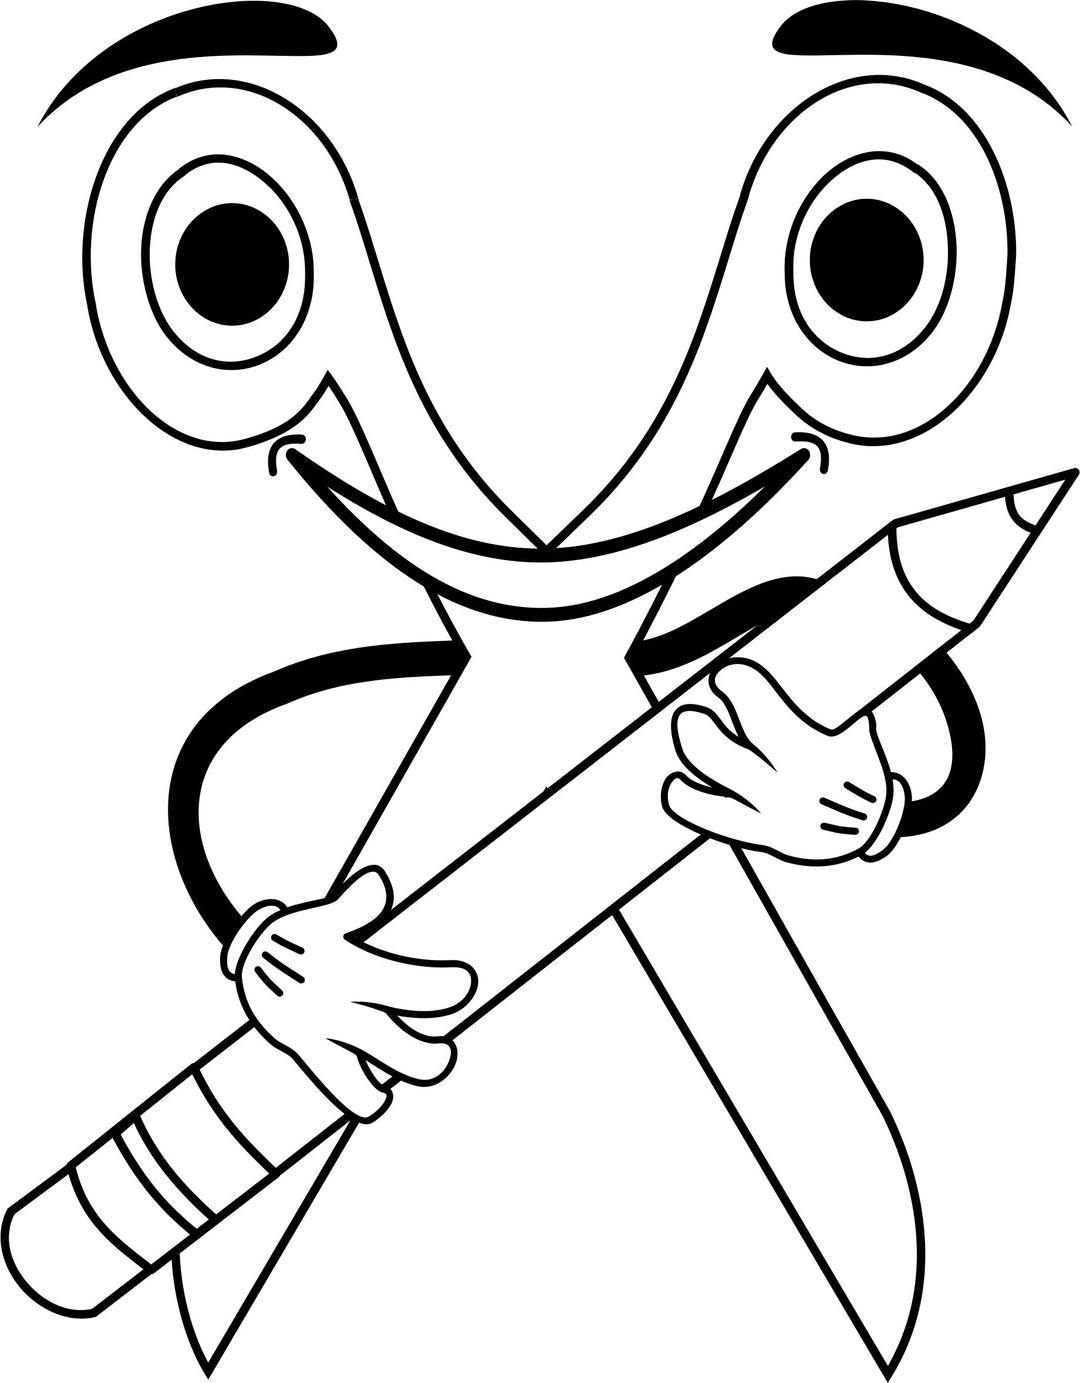 Openclipart Coloring Book Logo (not officially) png transparent